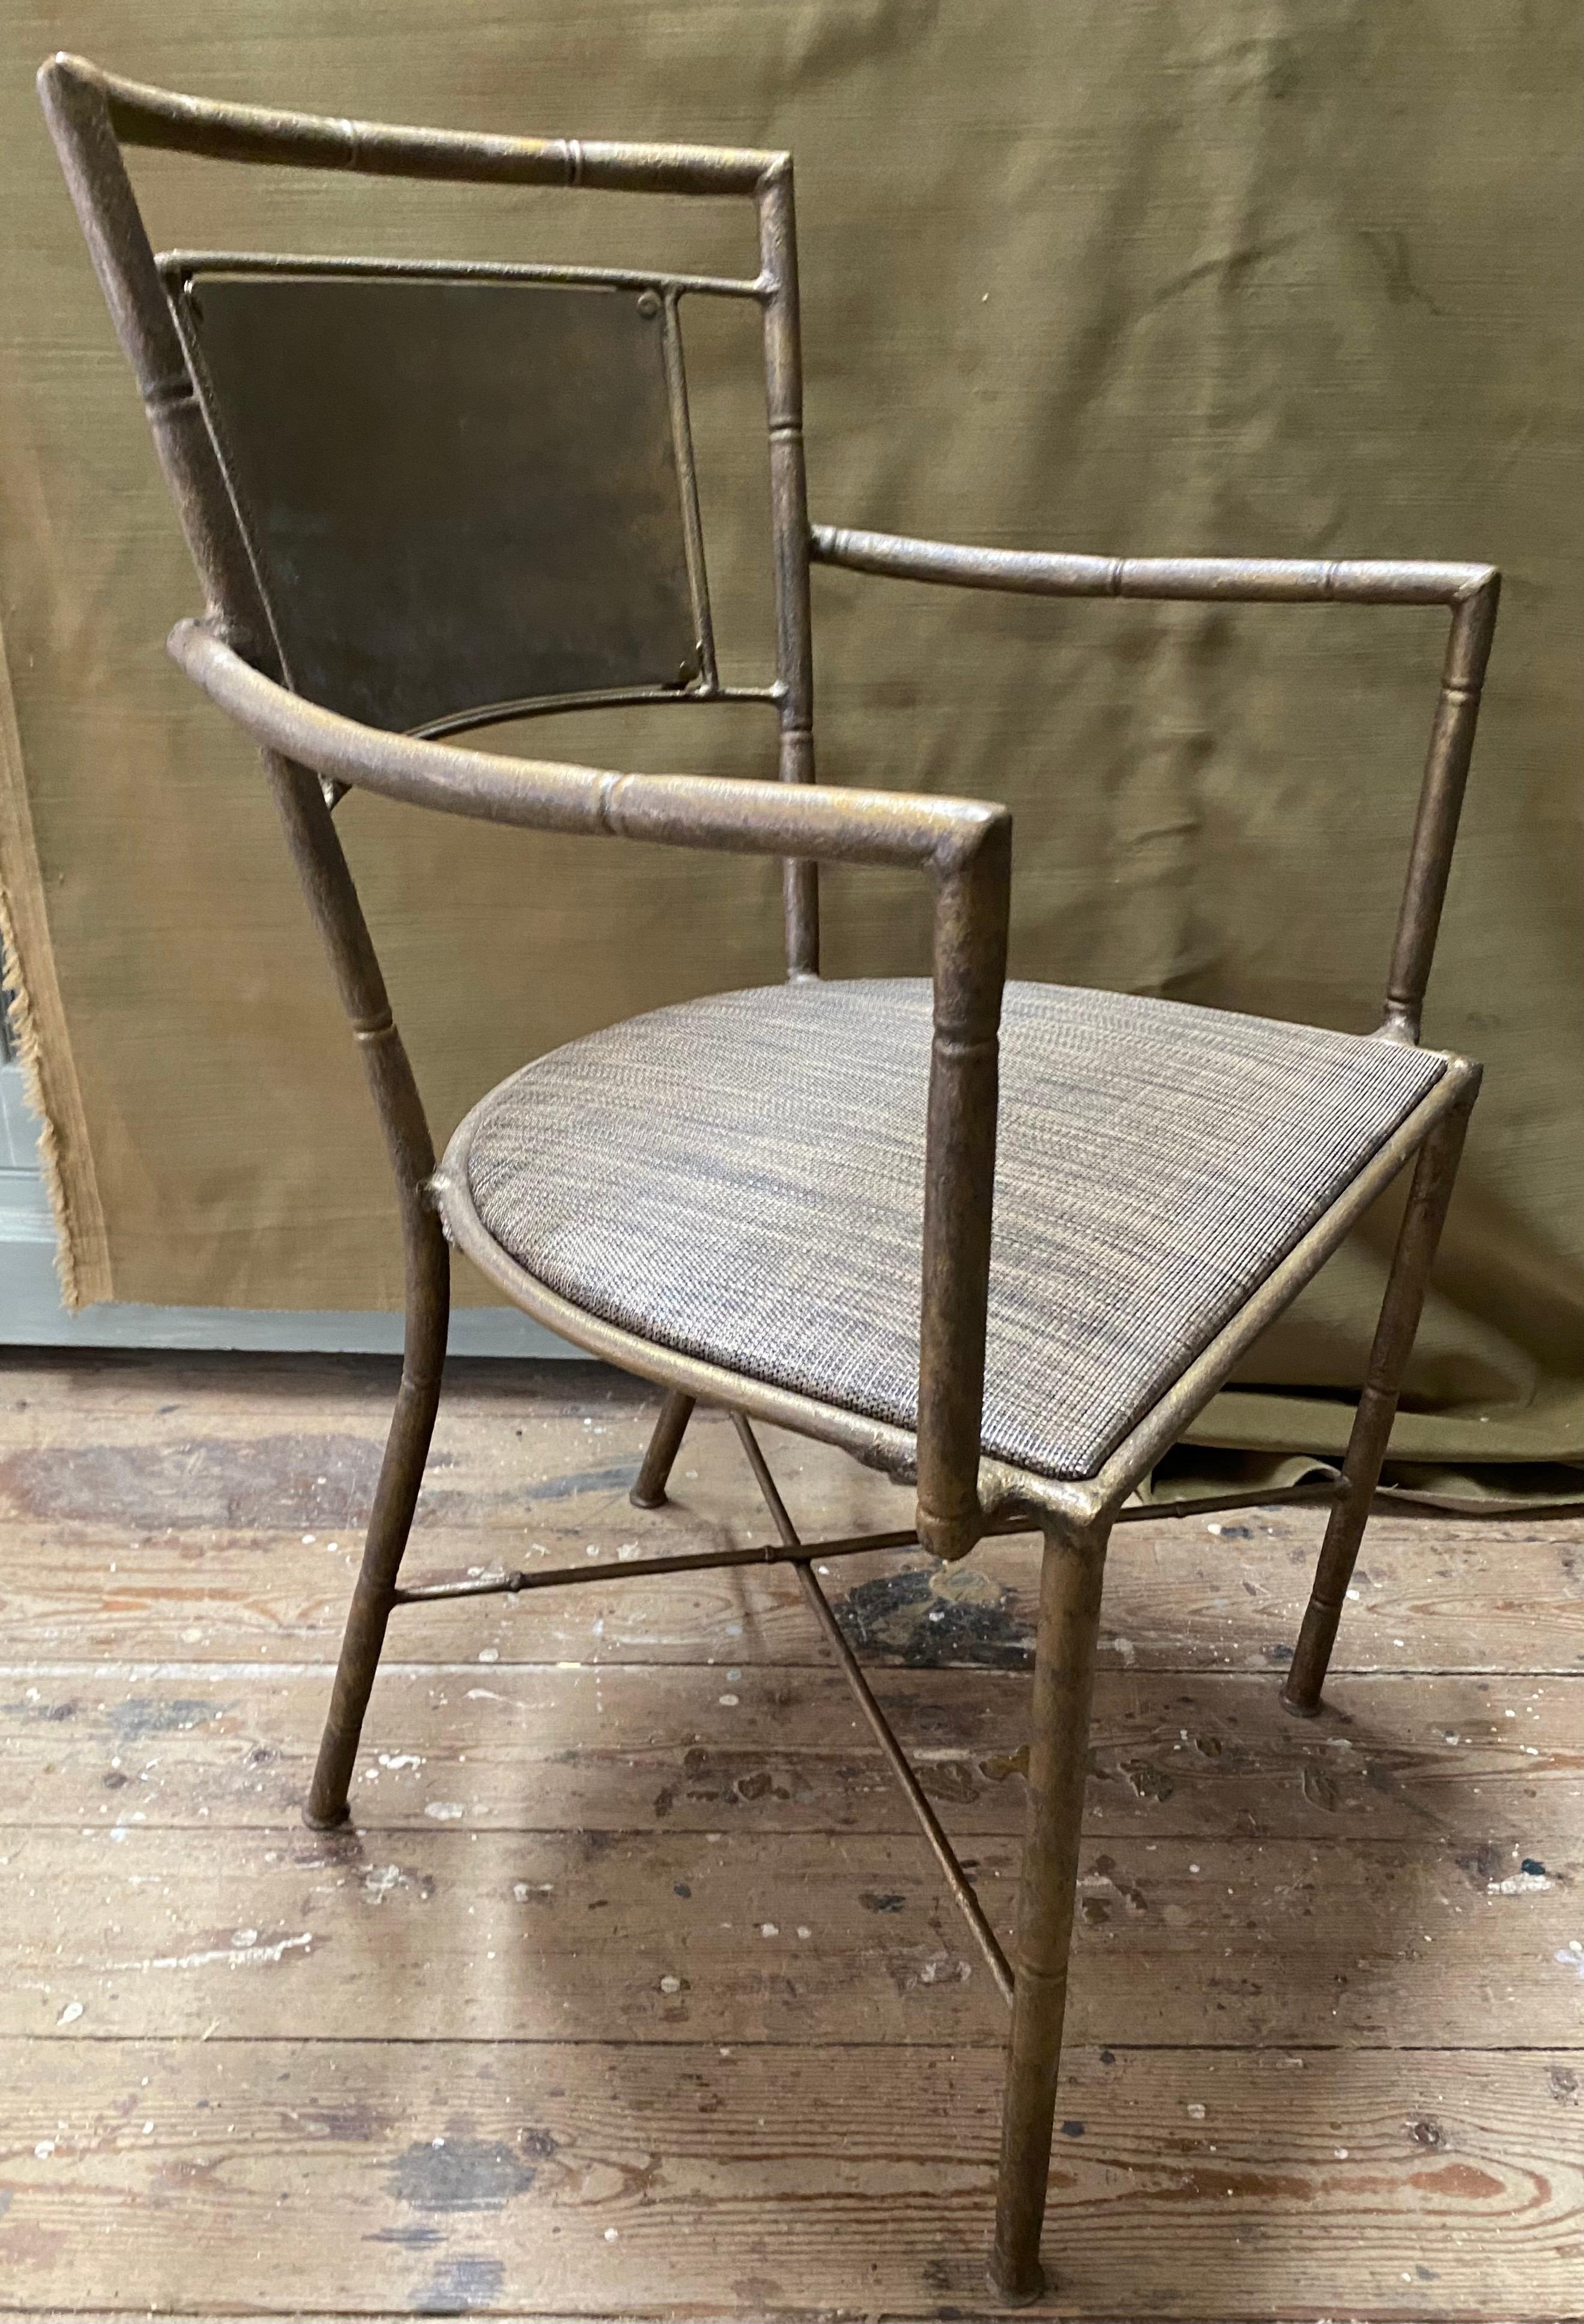 Pair of stylish indoor or outdoor gold tone iron metal garden arm chairs. Use the pair for dining chairs or for extra seating. Great for porch, patio or just about any room.
Measures: Arm heigh = 24.75